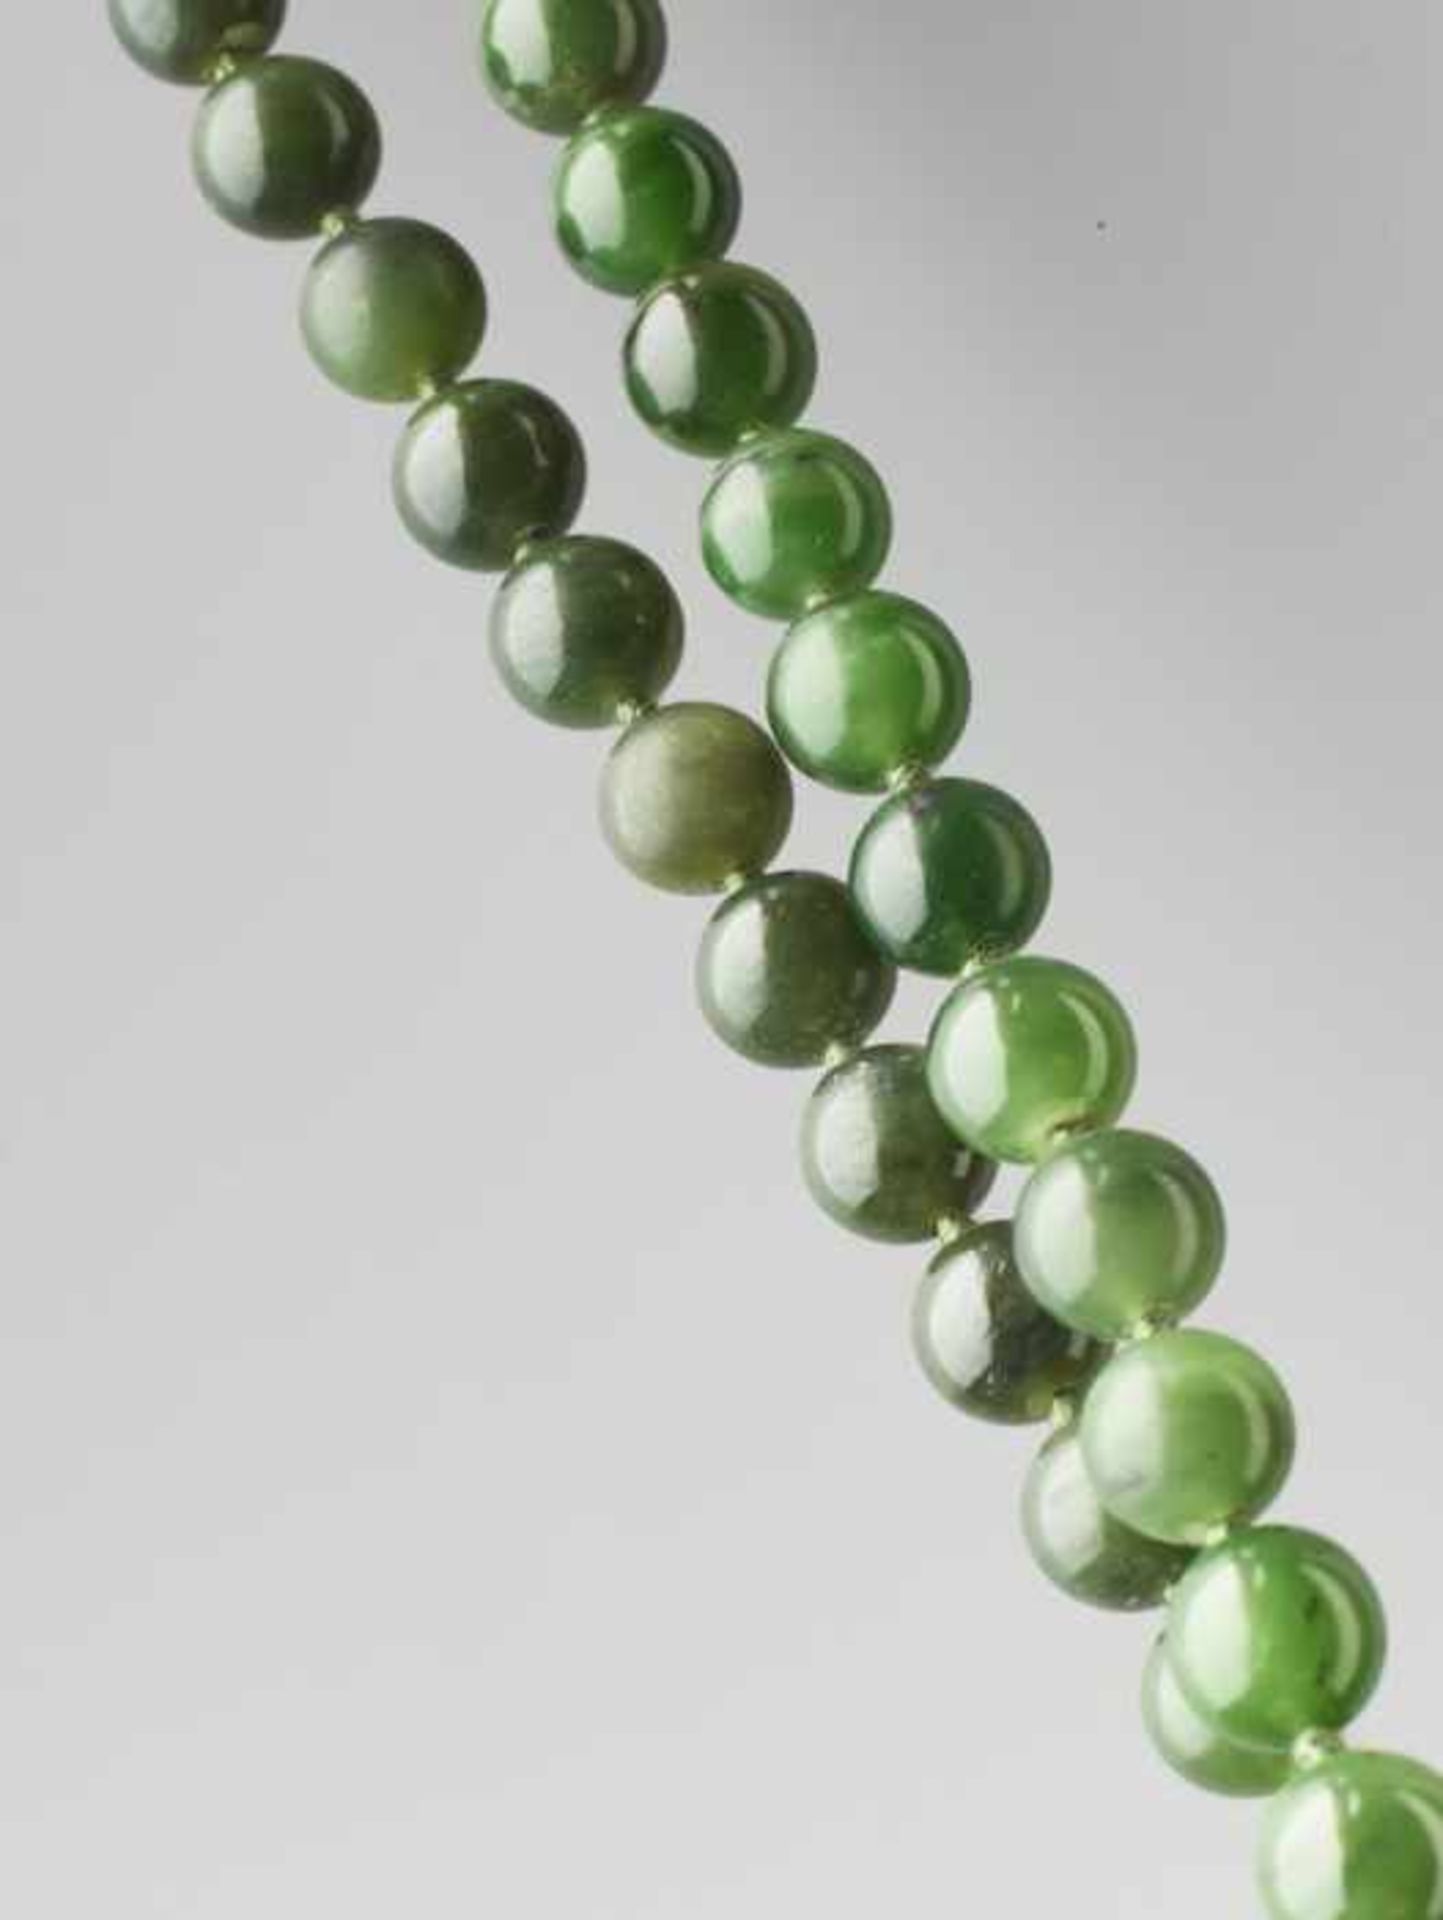 A SPINACH GREEN NEPHRITE BEAD NECKLACE, 71 BEADS, LATE QING DYNASTY Certified natural dark and